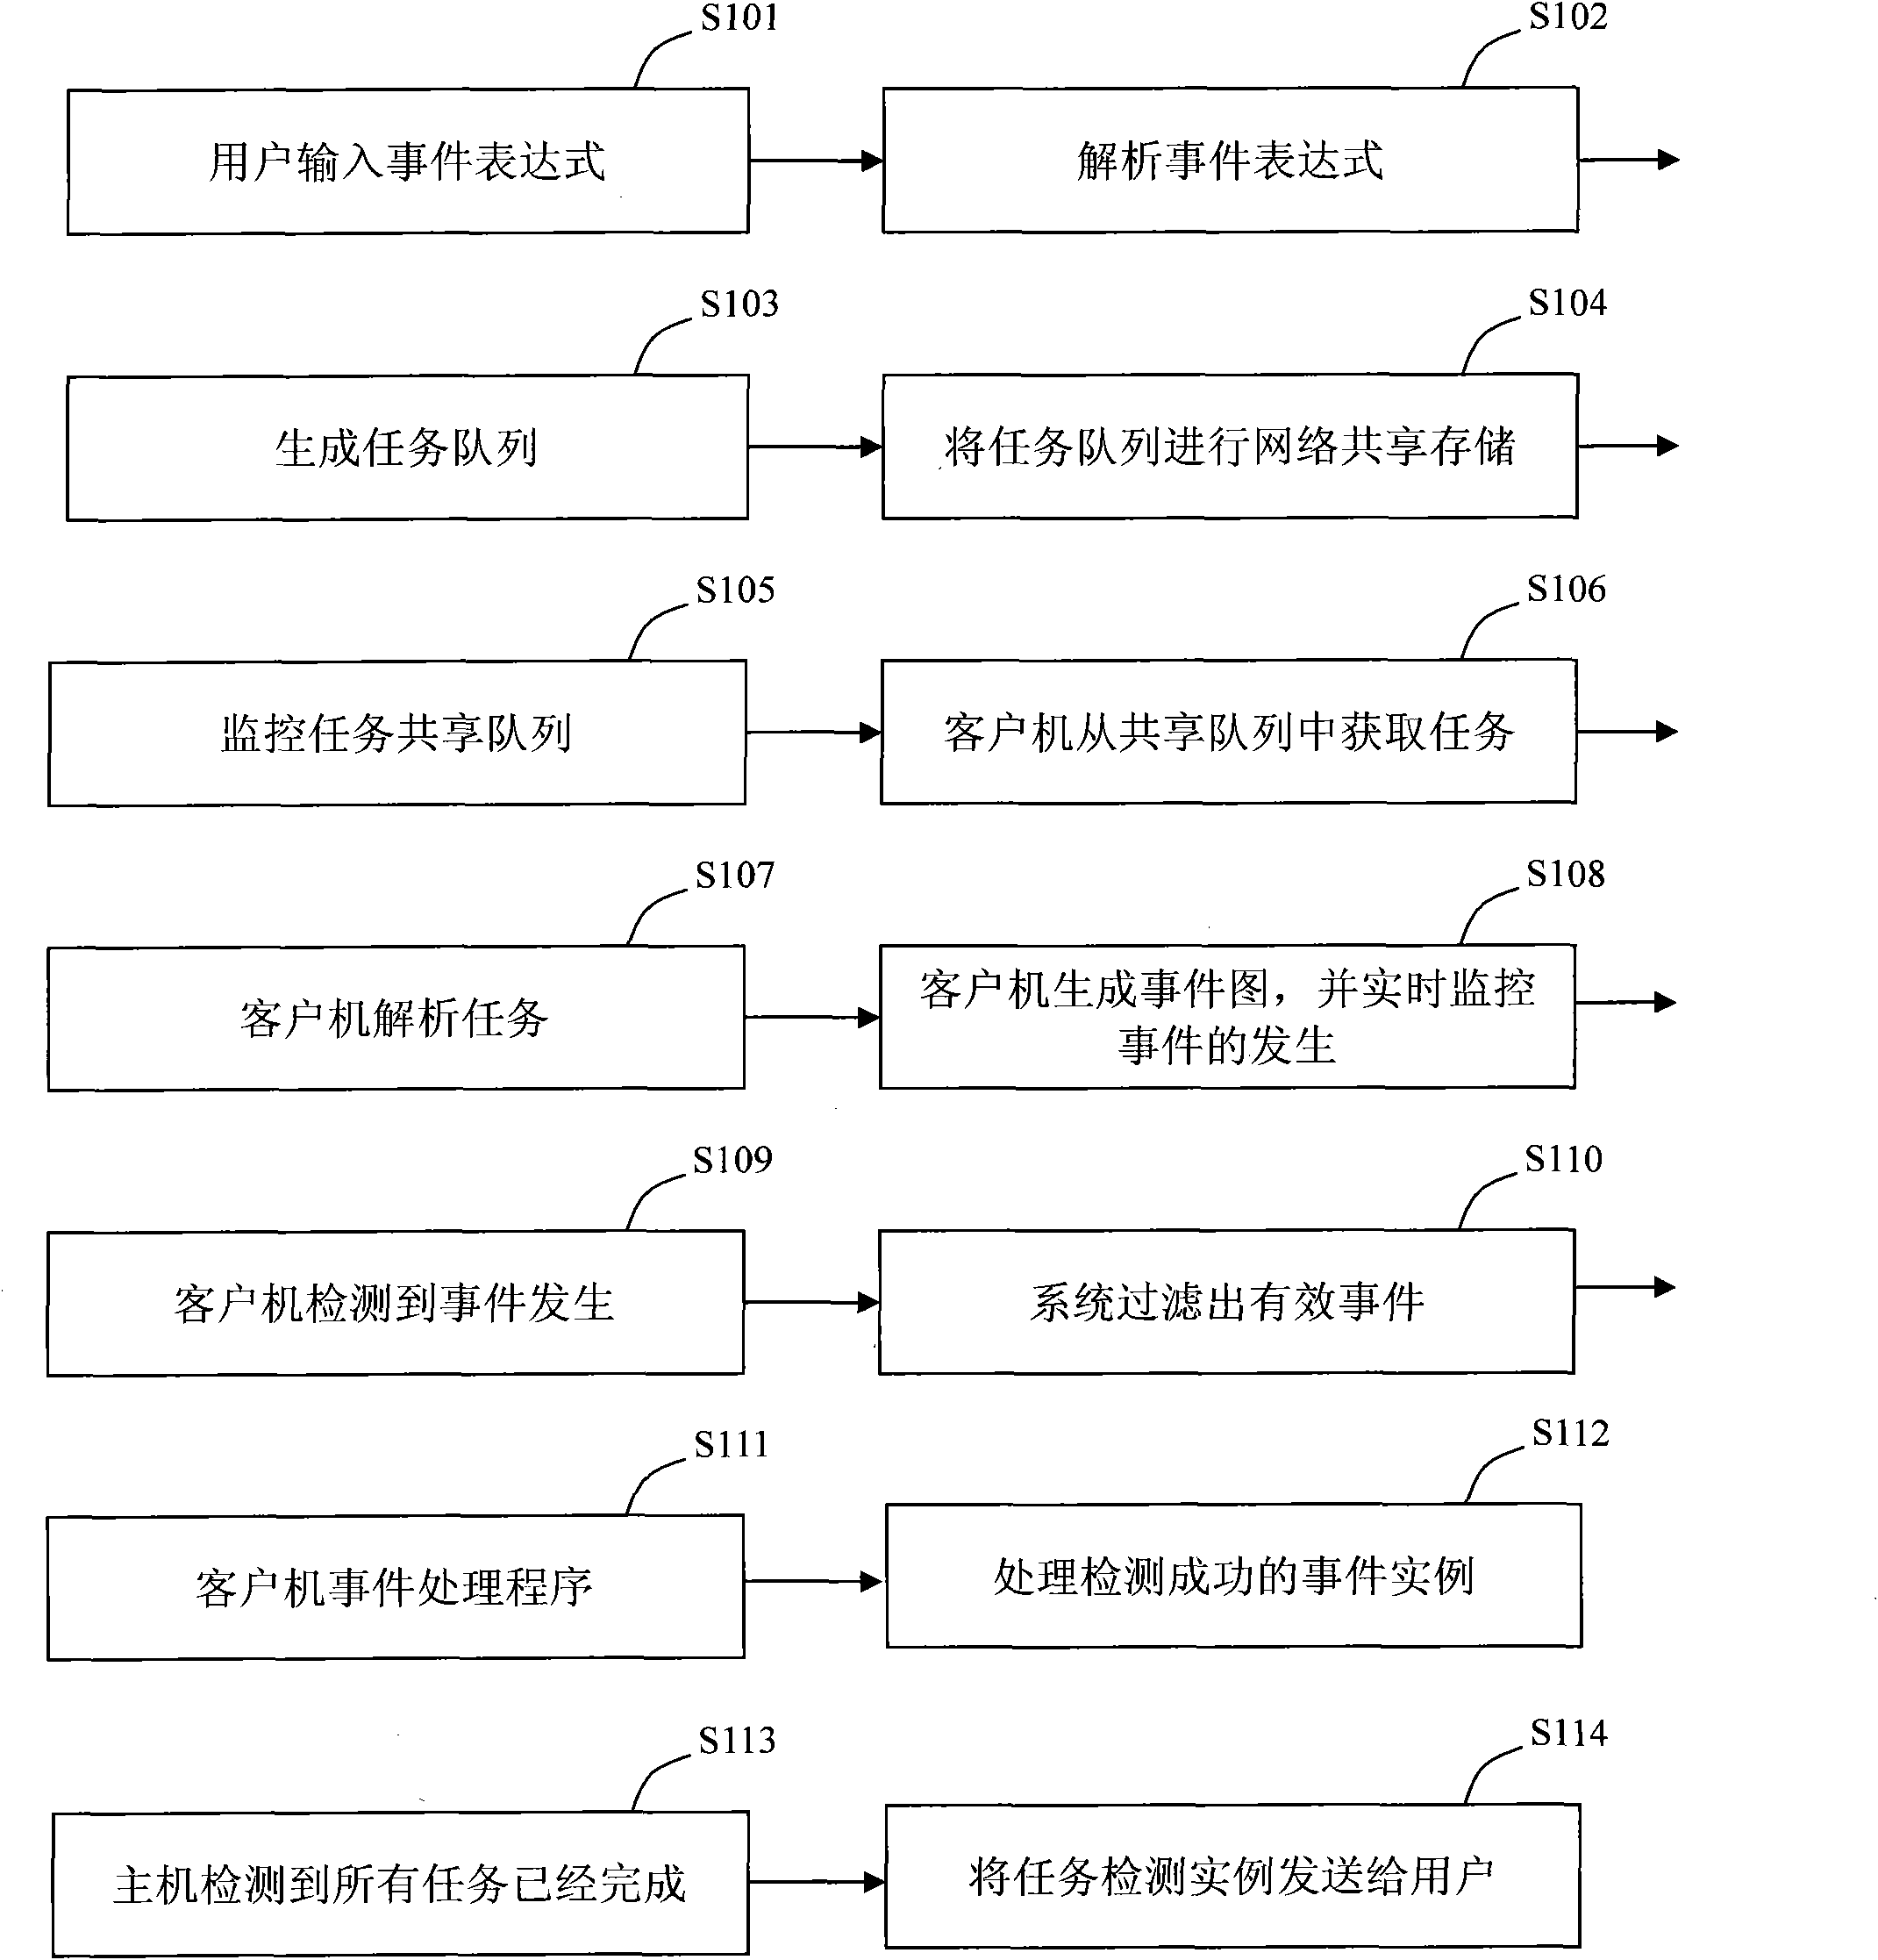 System and method for distributed complex event detection under RFID (Radio Frequency Identification Devices) equipment network environment